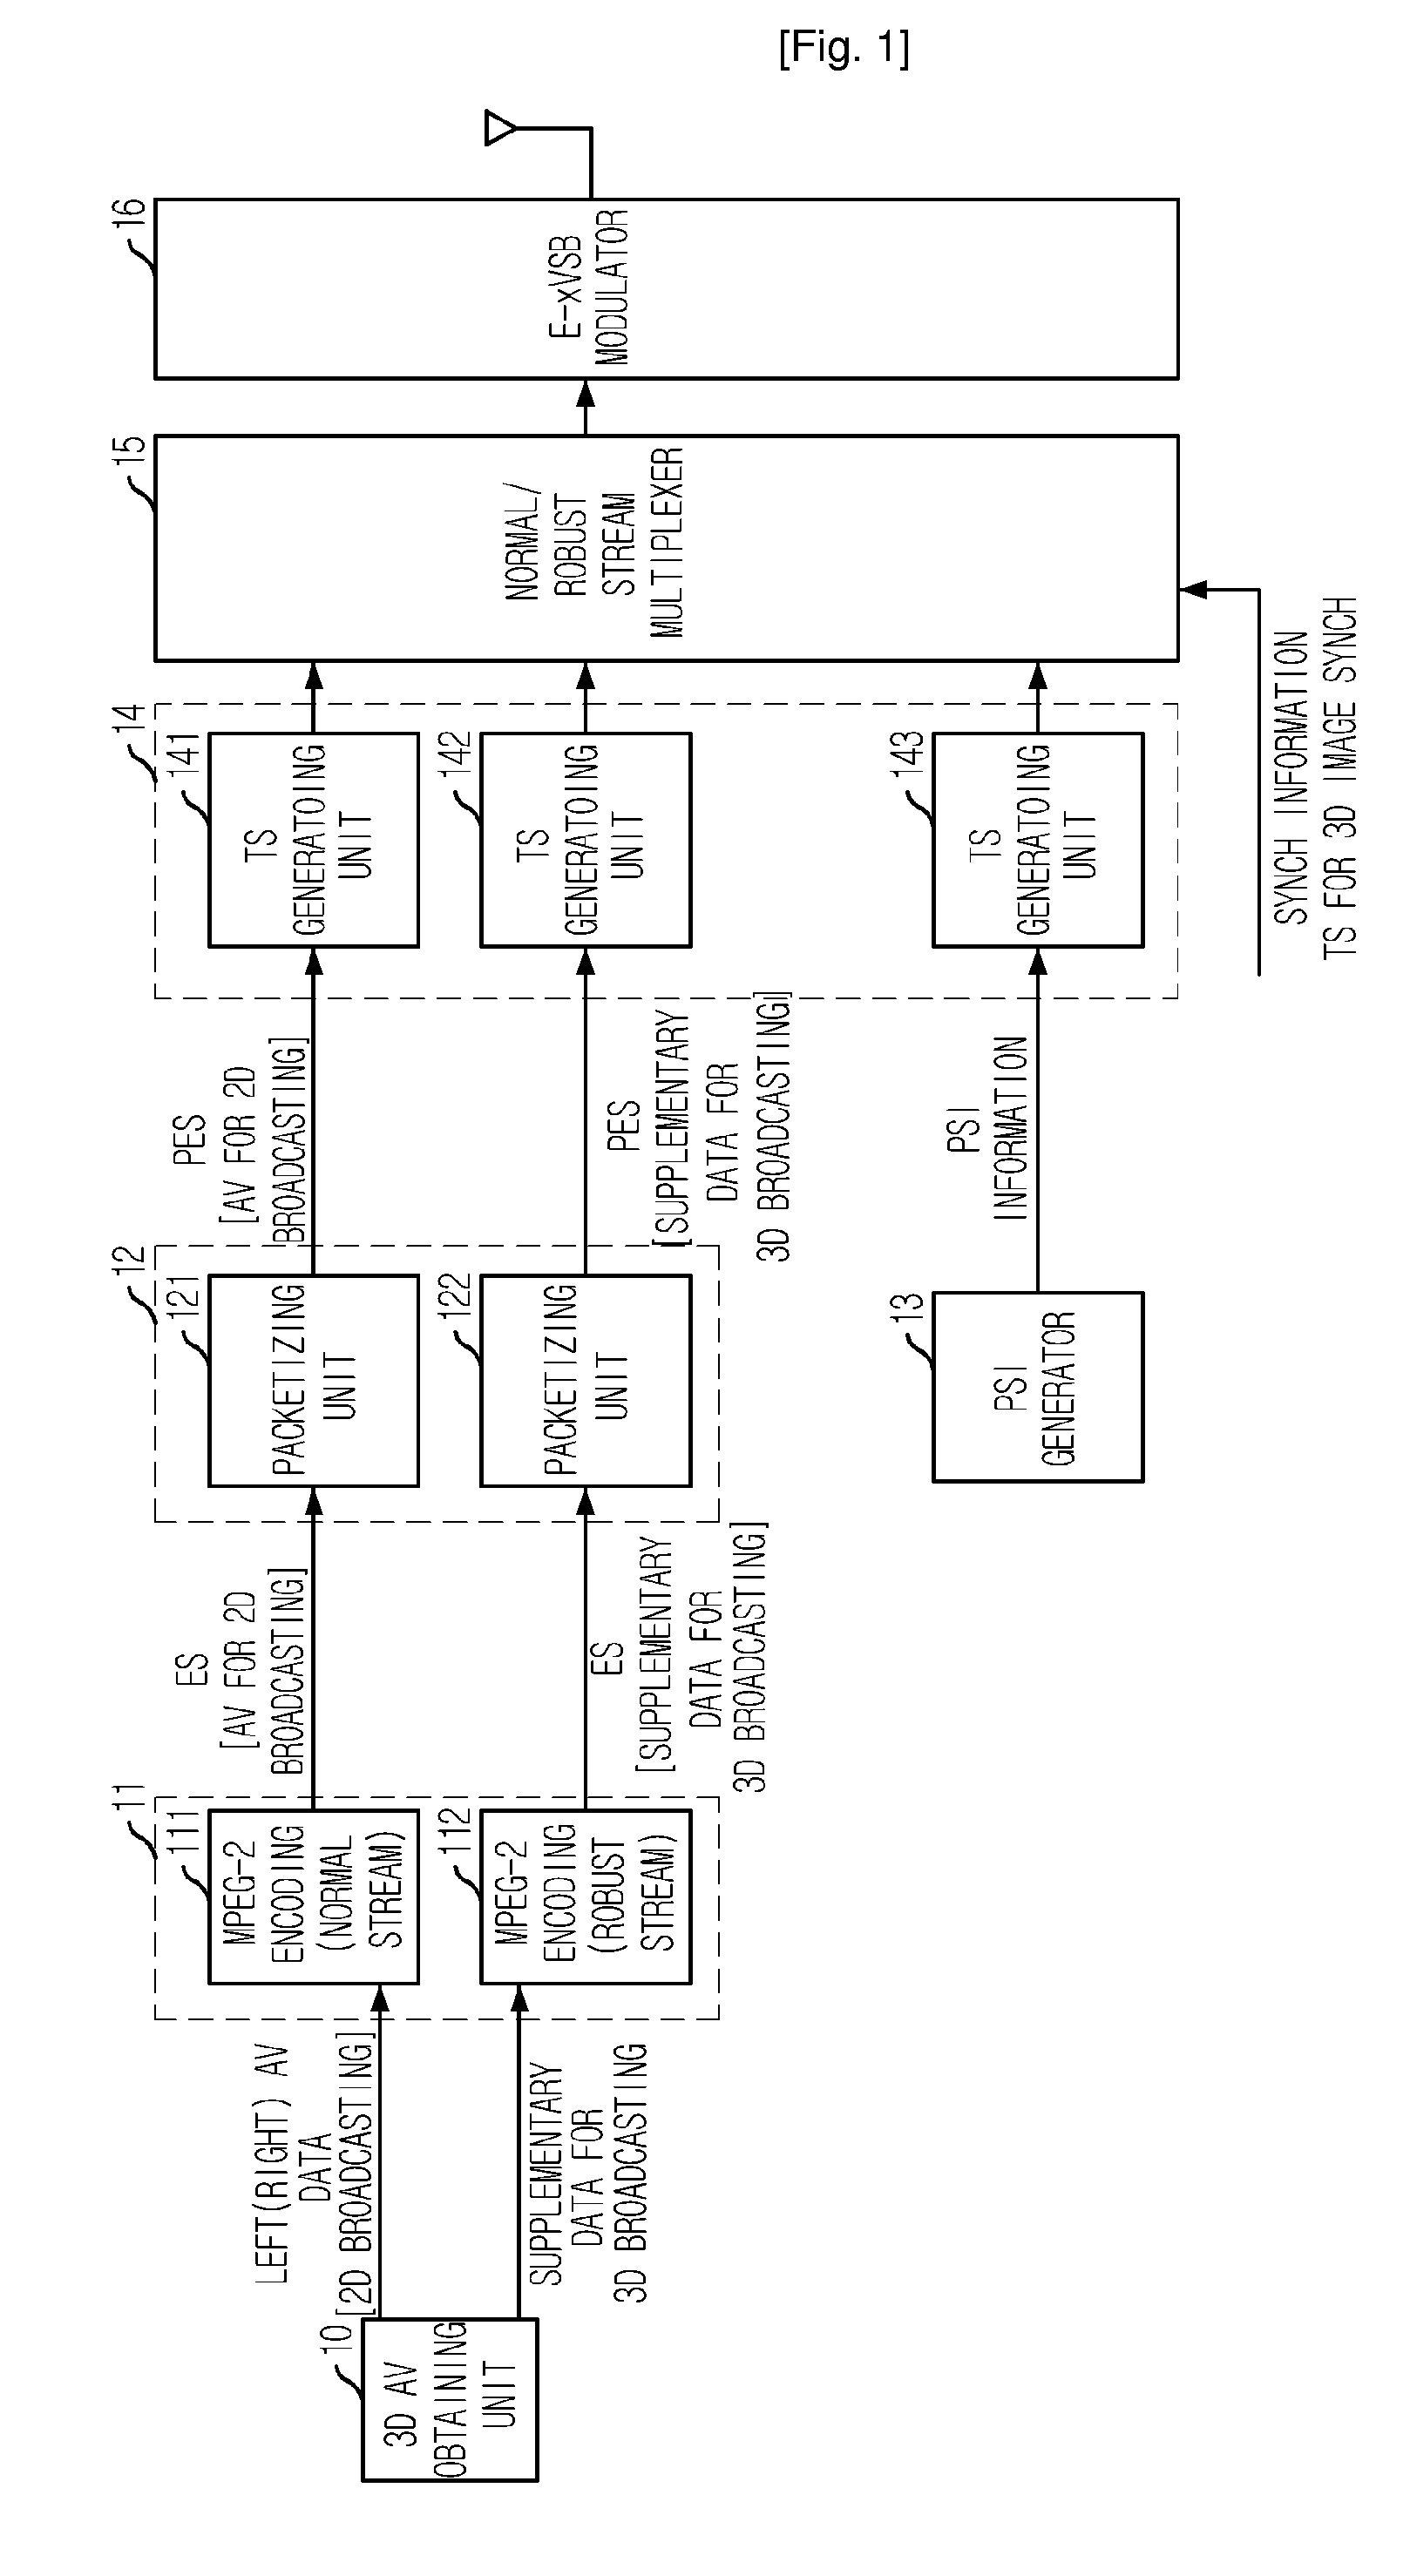 System and Method for Transmitting/Receiving Three Dimensional Video Based on Digital Broadcasting